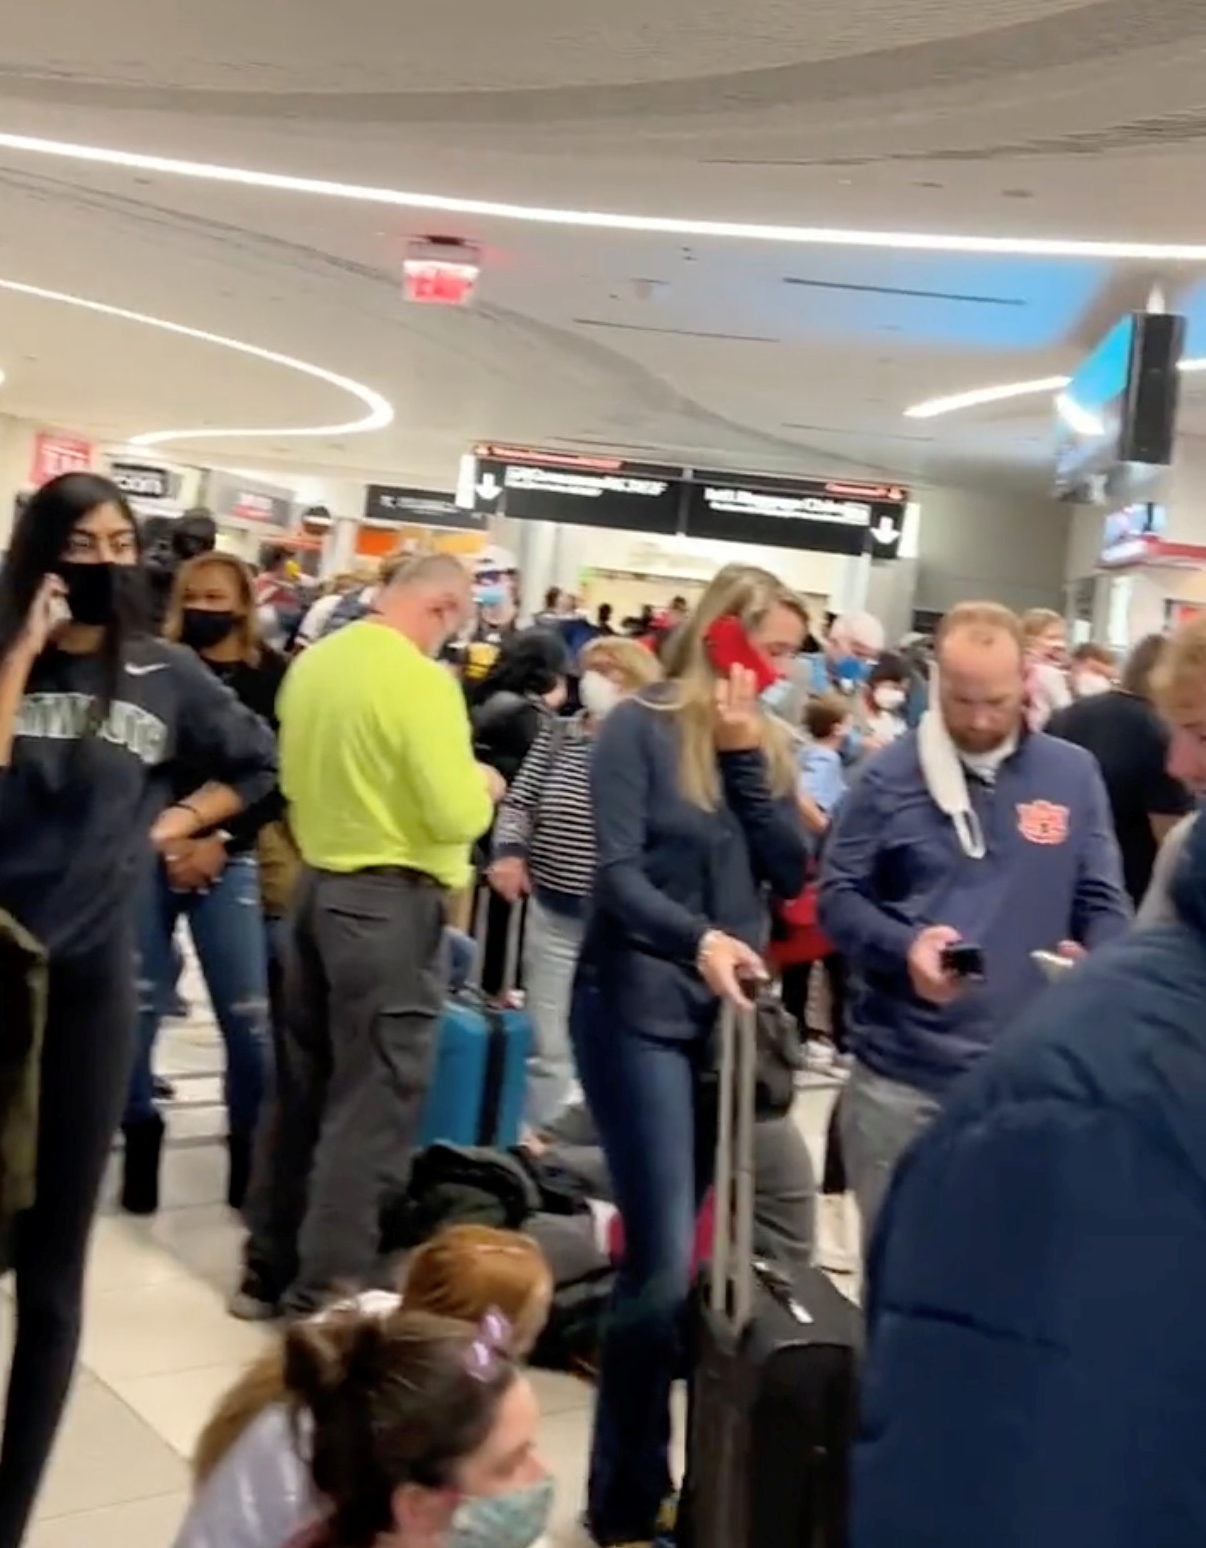 People gather to leave Hartsfield-Jackson Atlanta International Airport after reported shooting, in Atlanta, Georgia, U.S., November 20, 2021, in this still image obtained from a social media video. Twitter/mohiterajas/via REUTERS